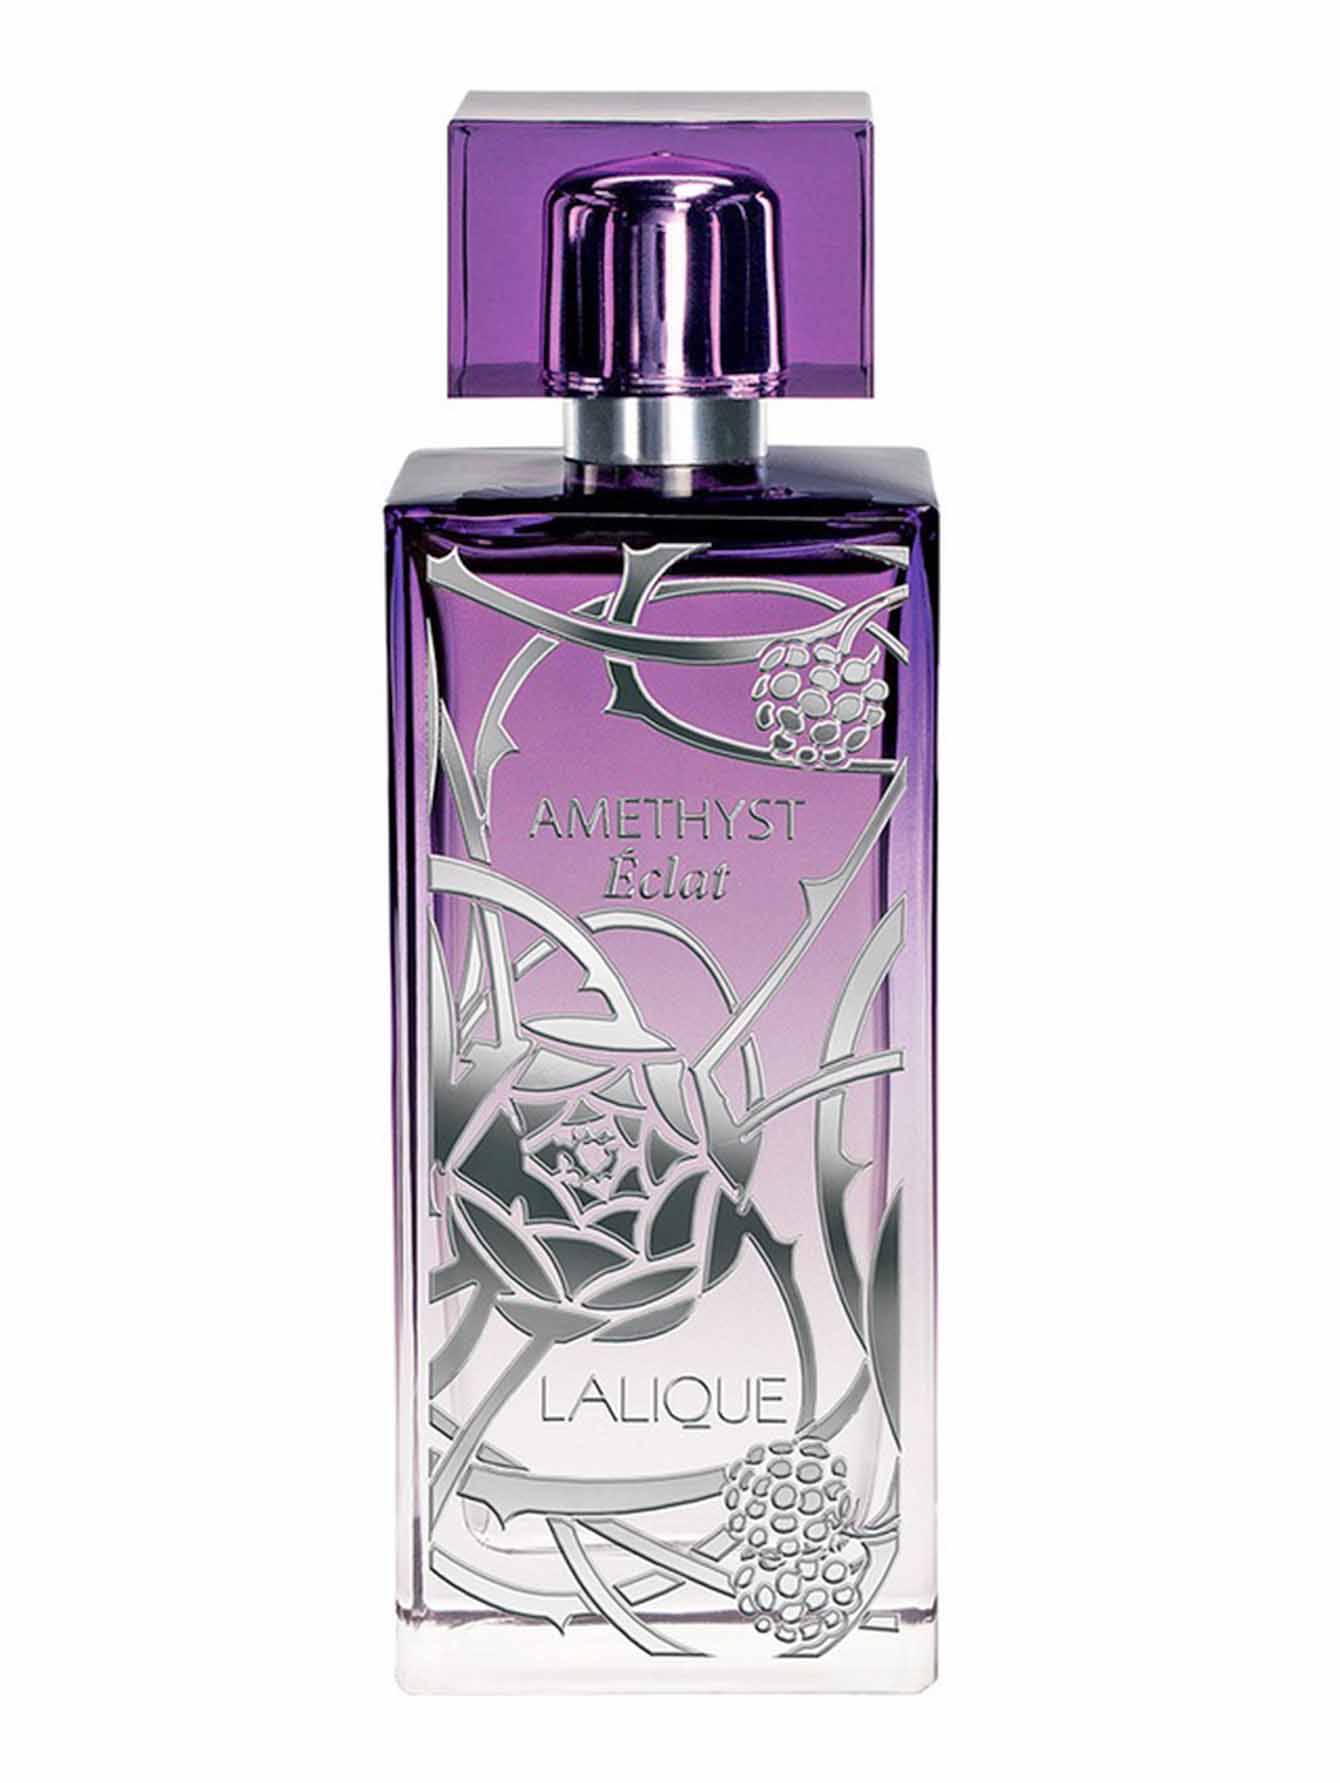 Вода аметист. Lalique Amethyst Eclat woman EDP 100 ml Tester. Lalique Amethyst 100ml EDP. Lalique Amethyst Eclat. Lalique Amethyst Eau de Parfum for women 100 ml..